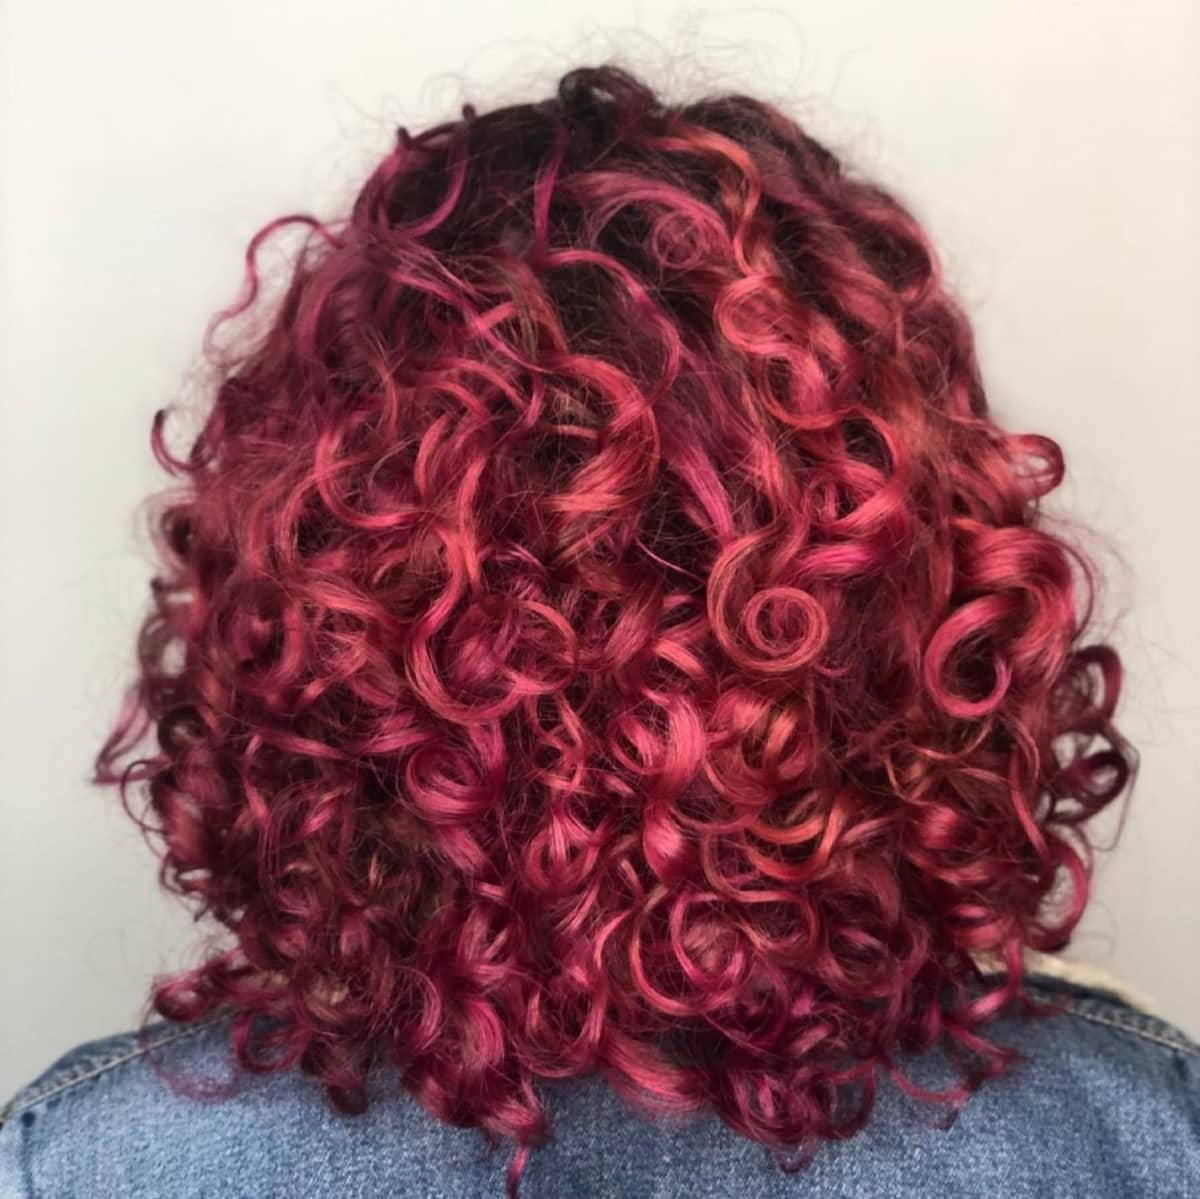 23 Incredible Examples of Magenta Hair Color